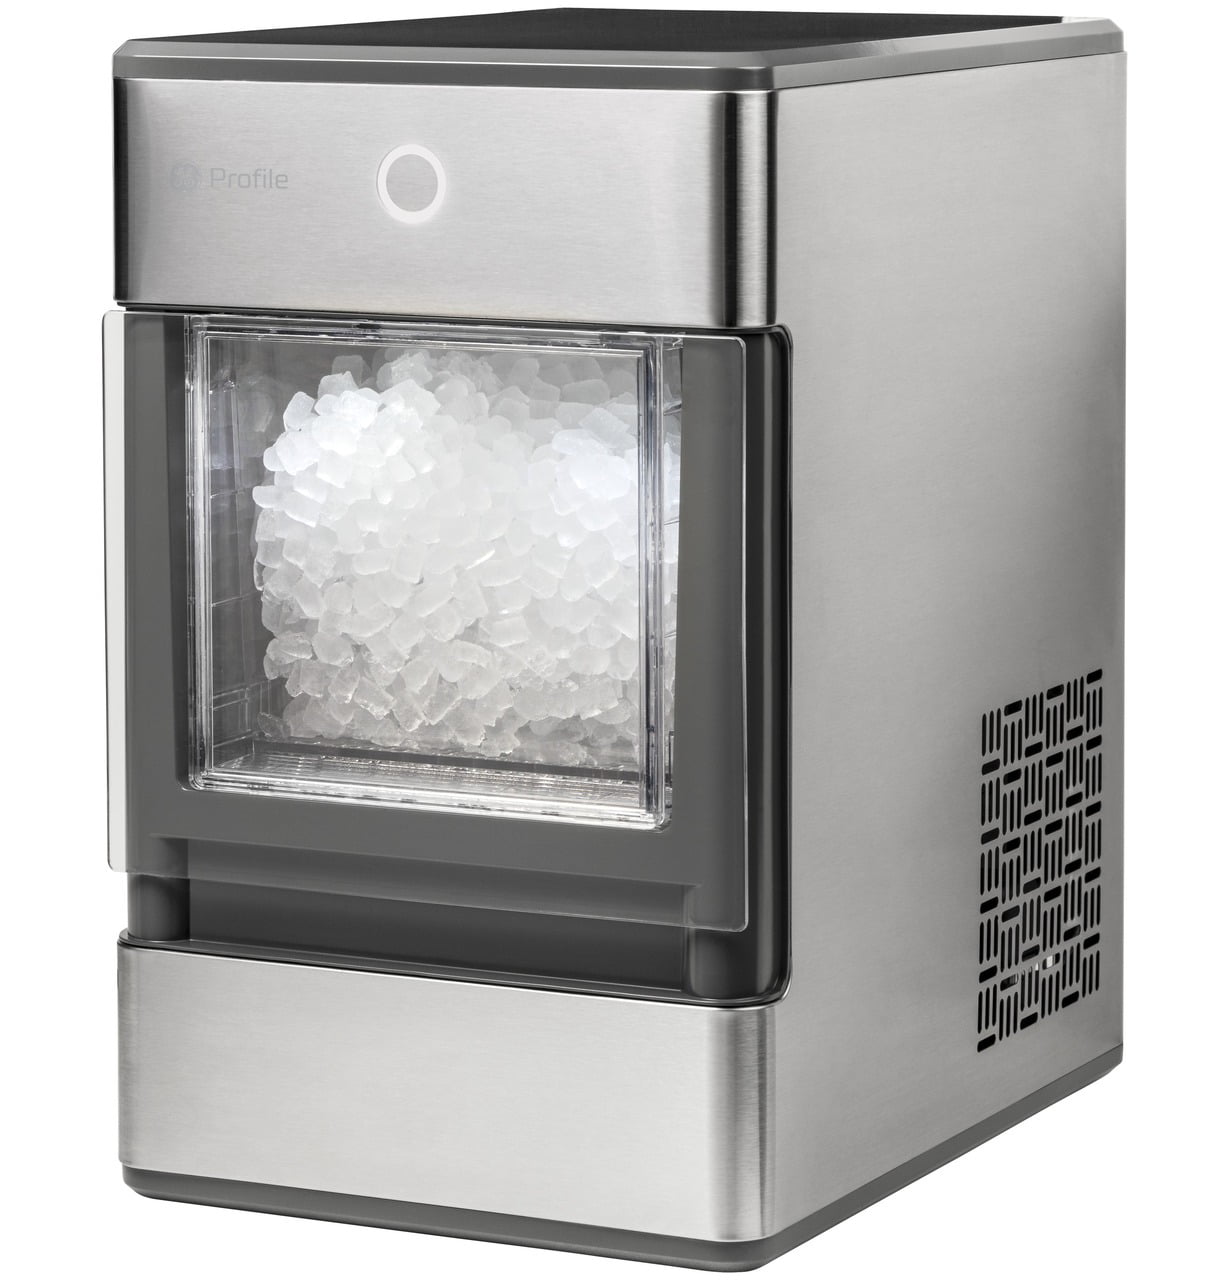 GENERAL ELECTRIC Profile Opal Nugget Ice Maker | Up to 24 lbs. Per Day Countertop Ice Maker, Stainless Steel